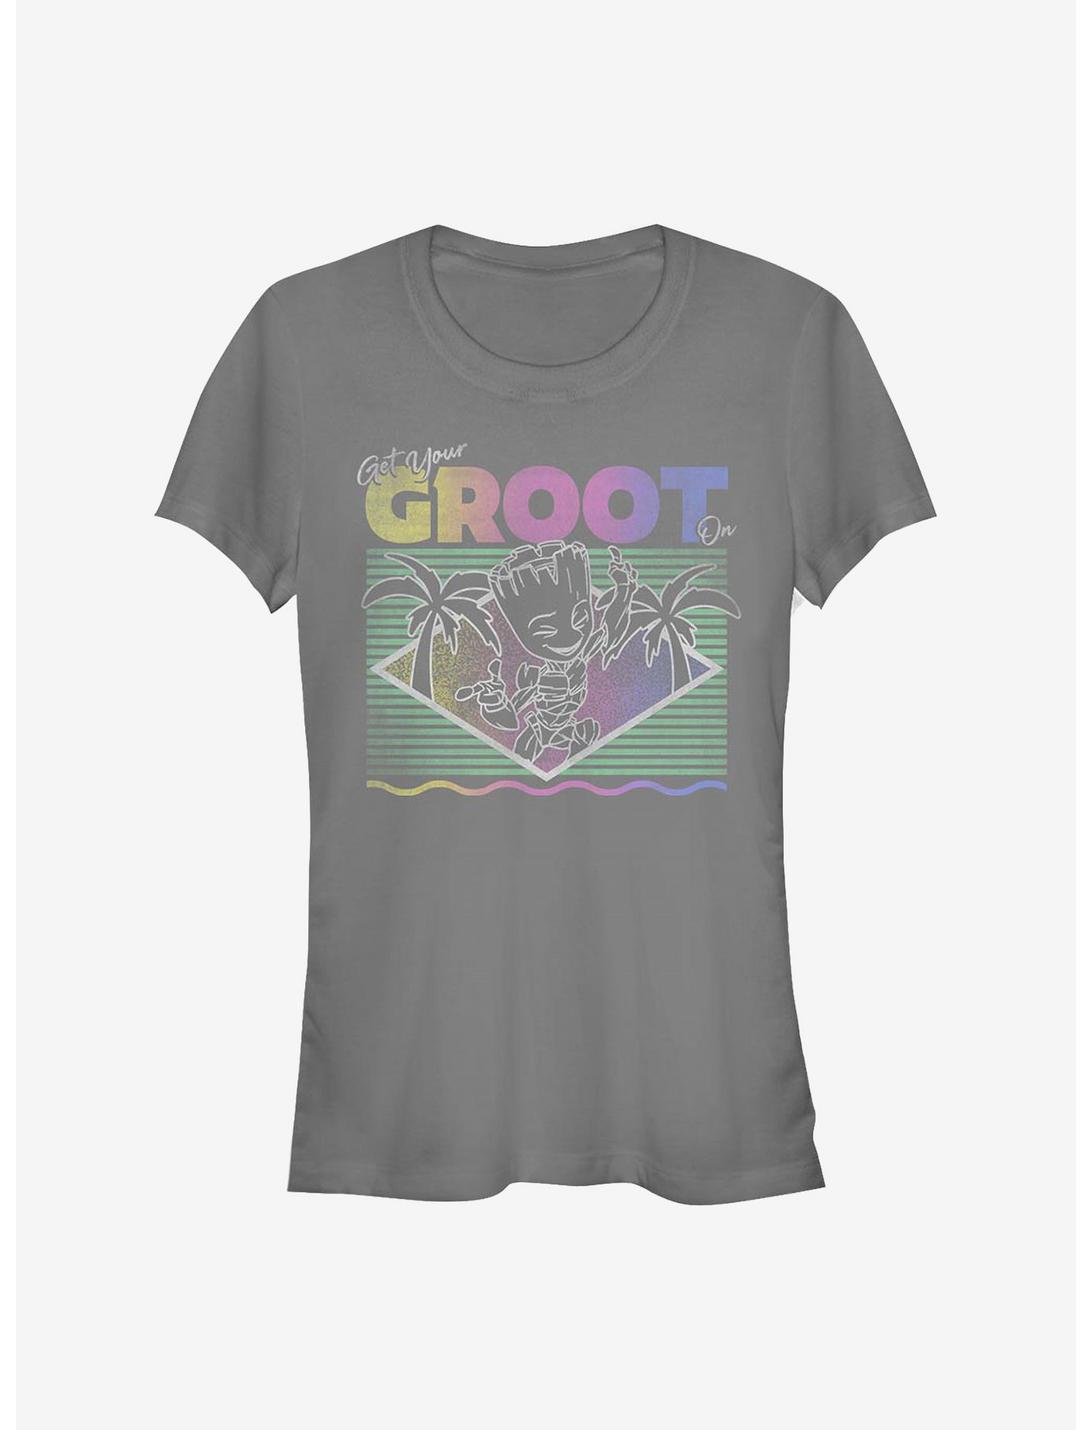 Marvel Guardians Of The Galaxy Vacay Groot Girls T-Shirt, CHARCOAL, hi-res